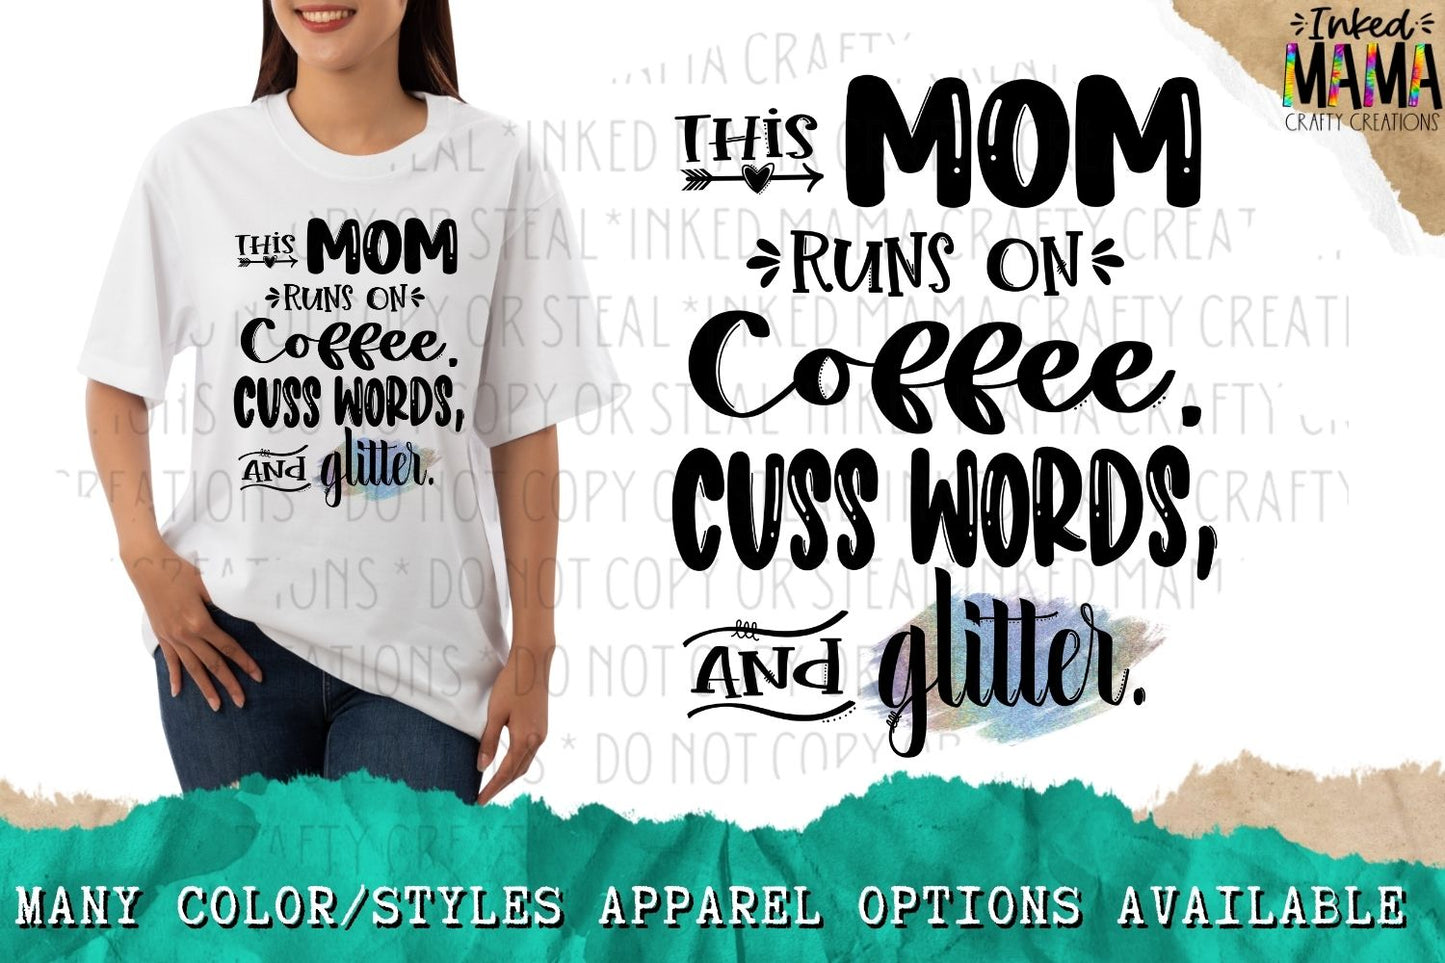 This Mom runs on coffee, cuss words and glitter - Apparel